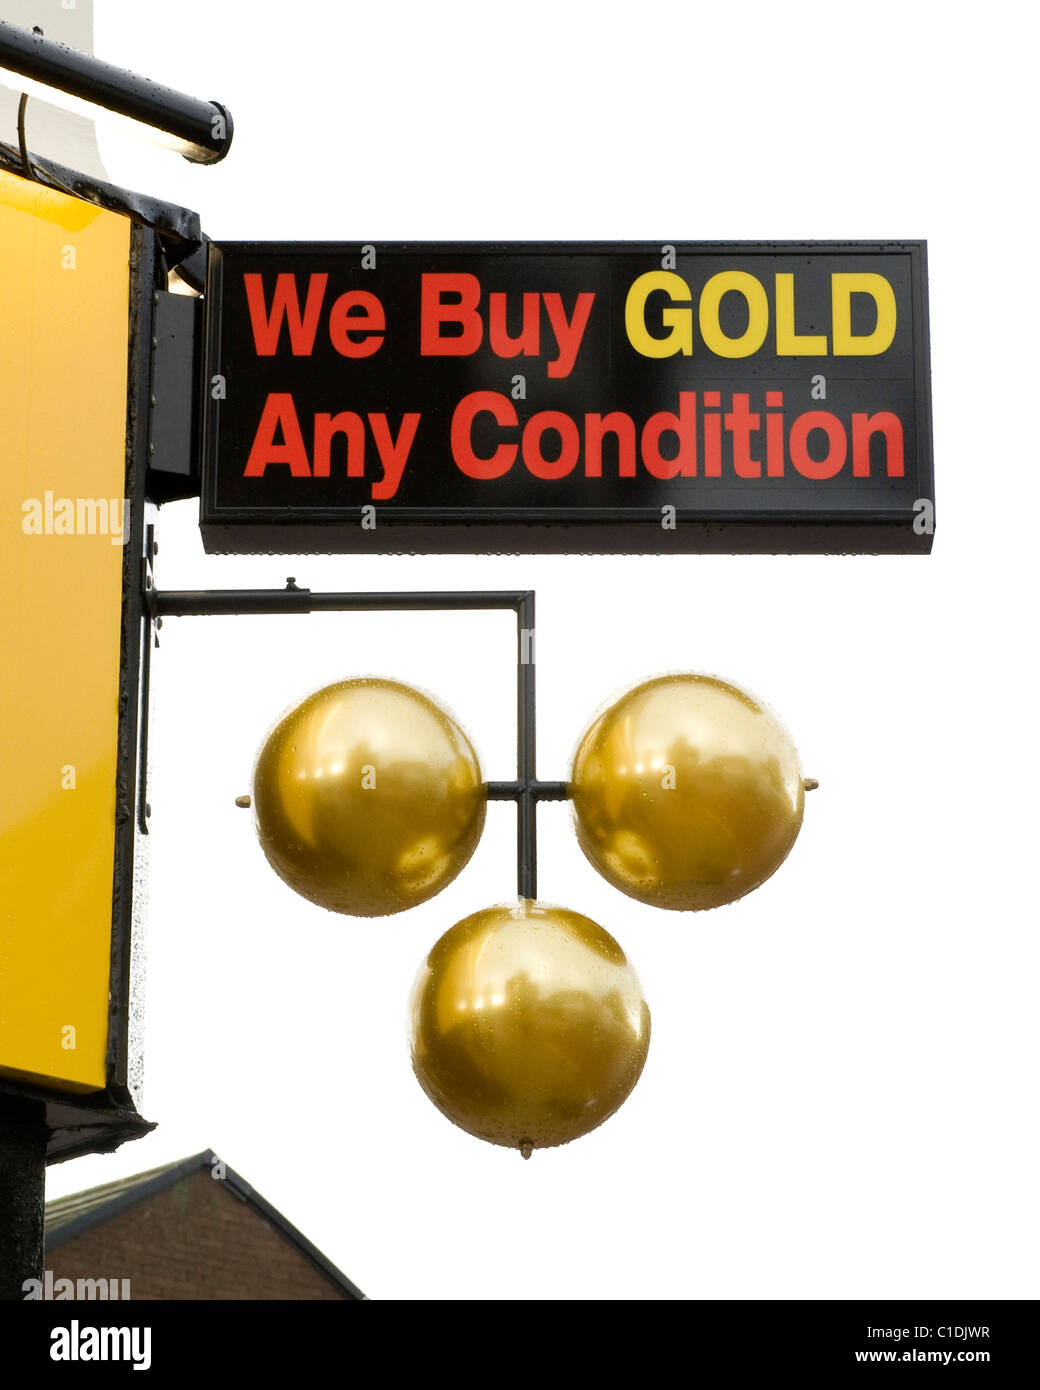 Pawnbroker's Three Balls with 'We Buy Gold' sign Stock Photo